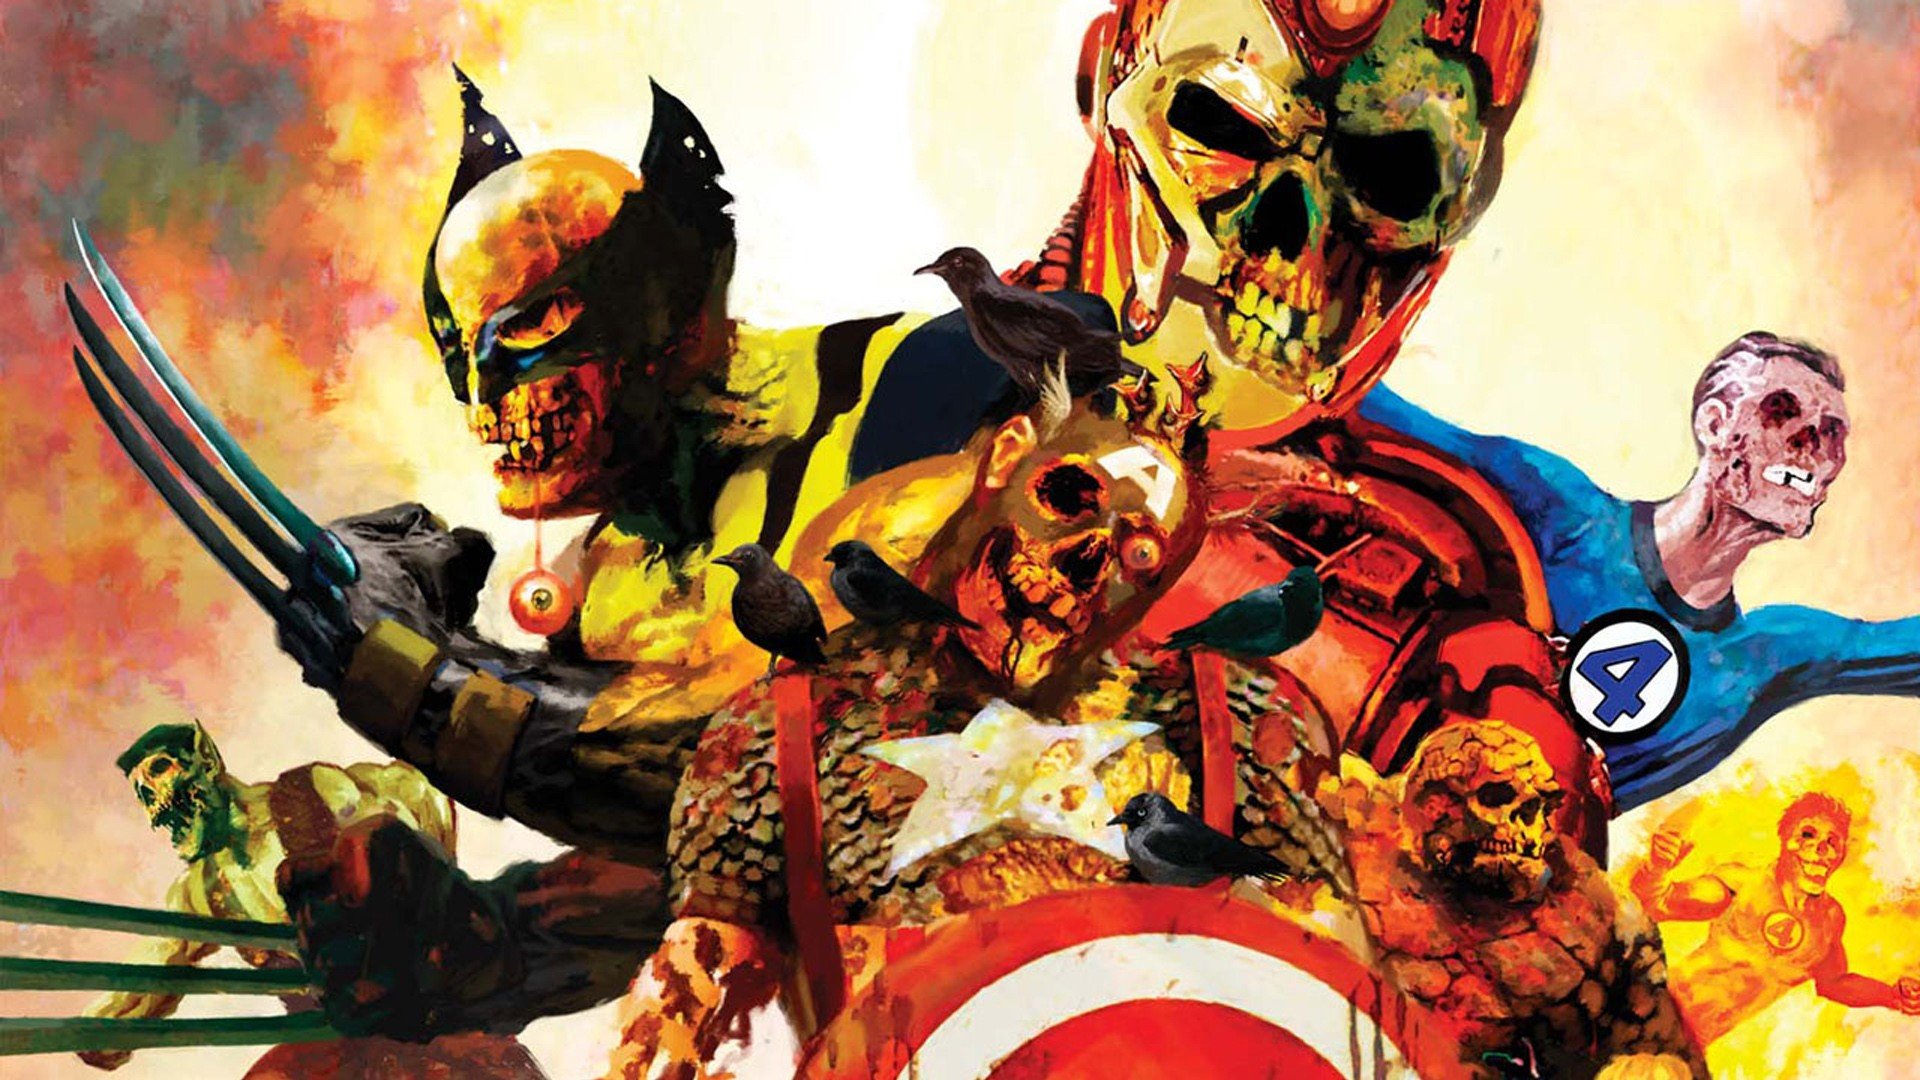 Marvel Zombies Full HD Wallpaper and Background Image | 1920x1080 | ID